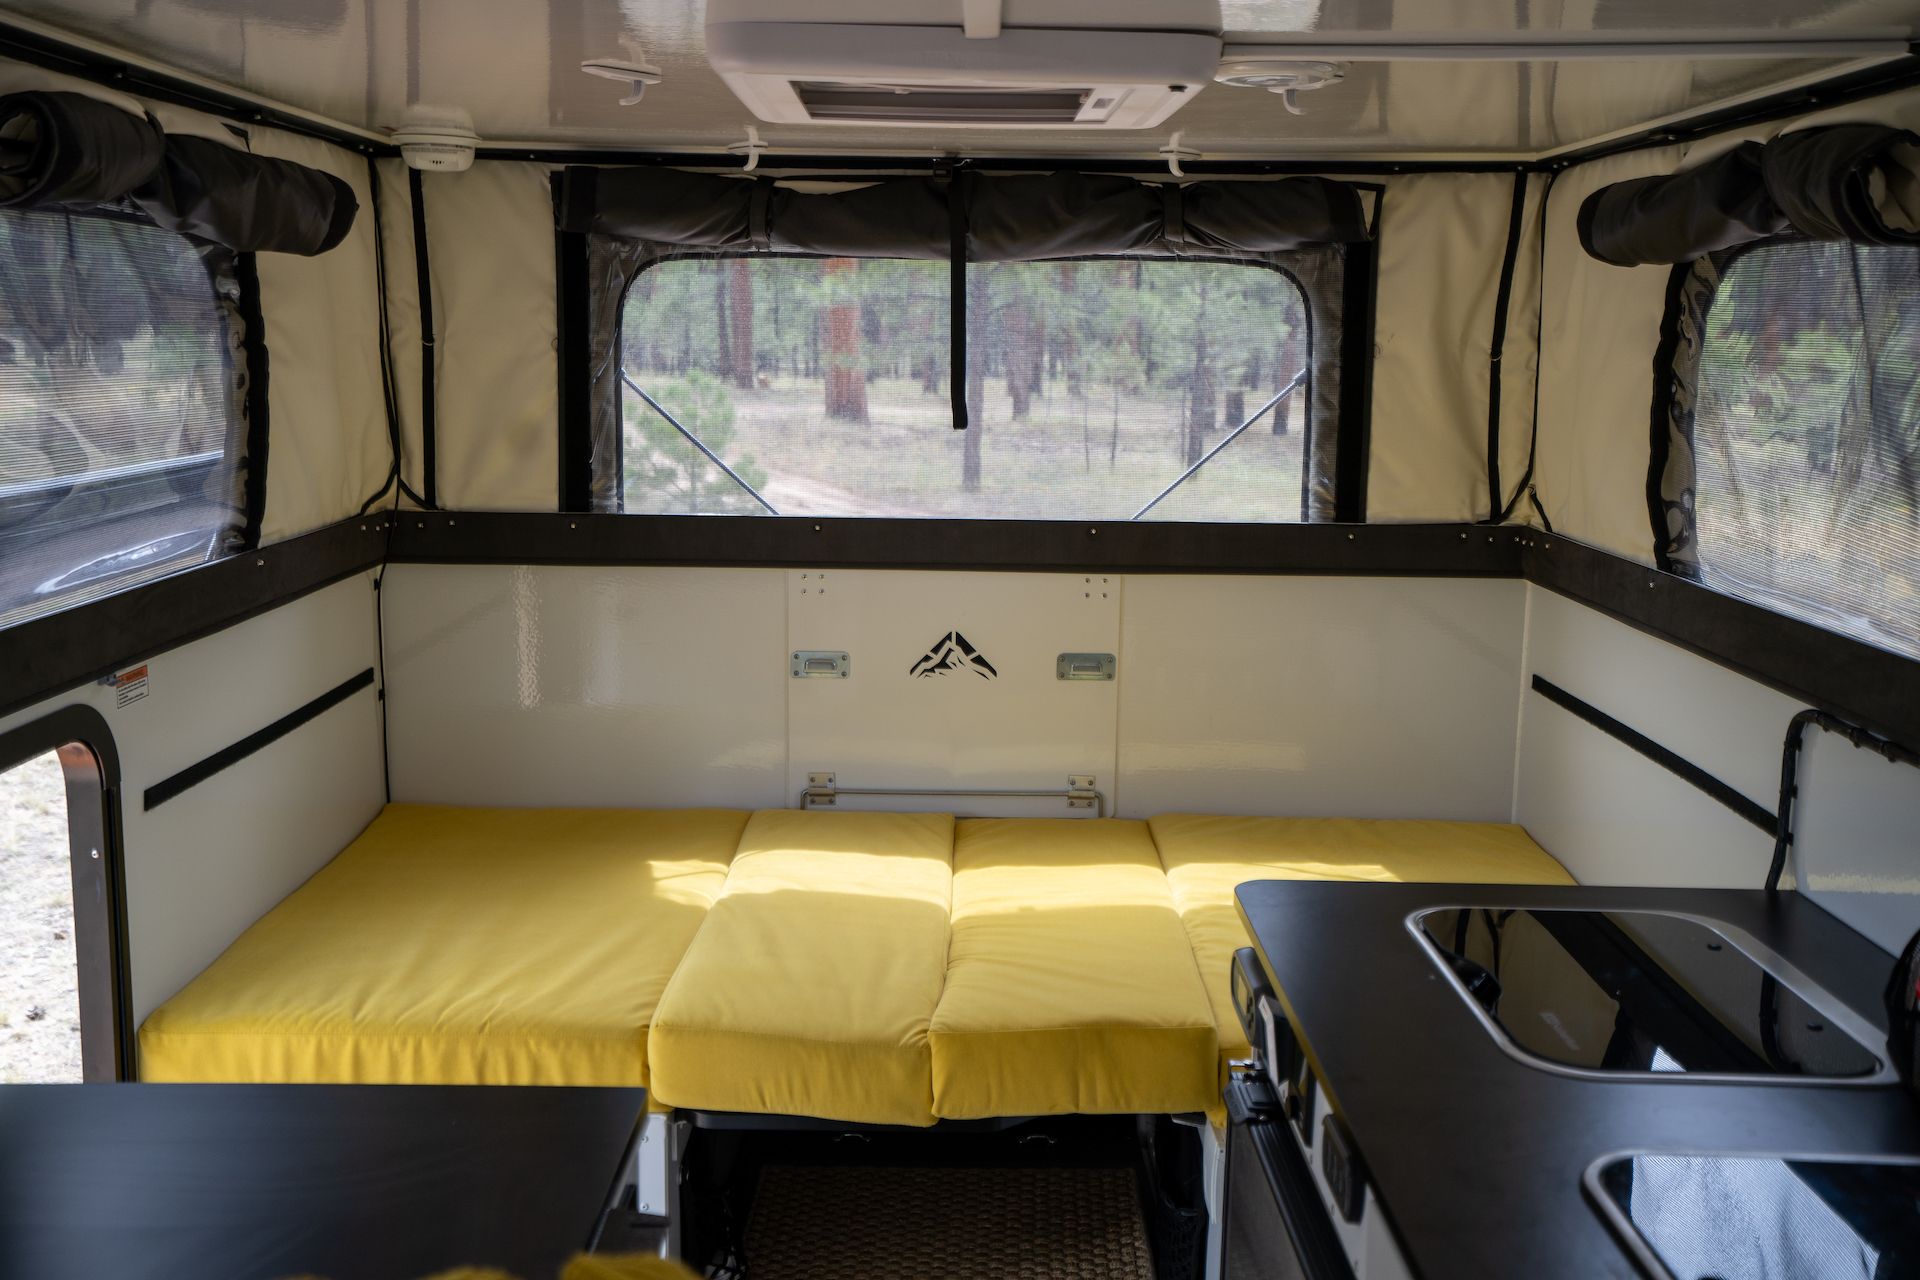 According to our first guest, the convertible bed is way more comfortable than in the Camp-X